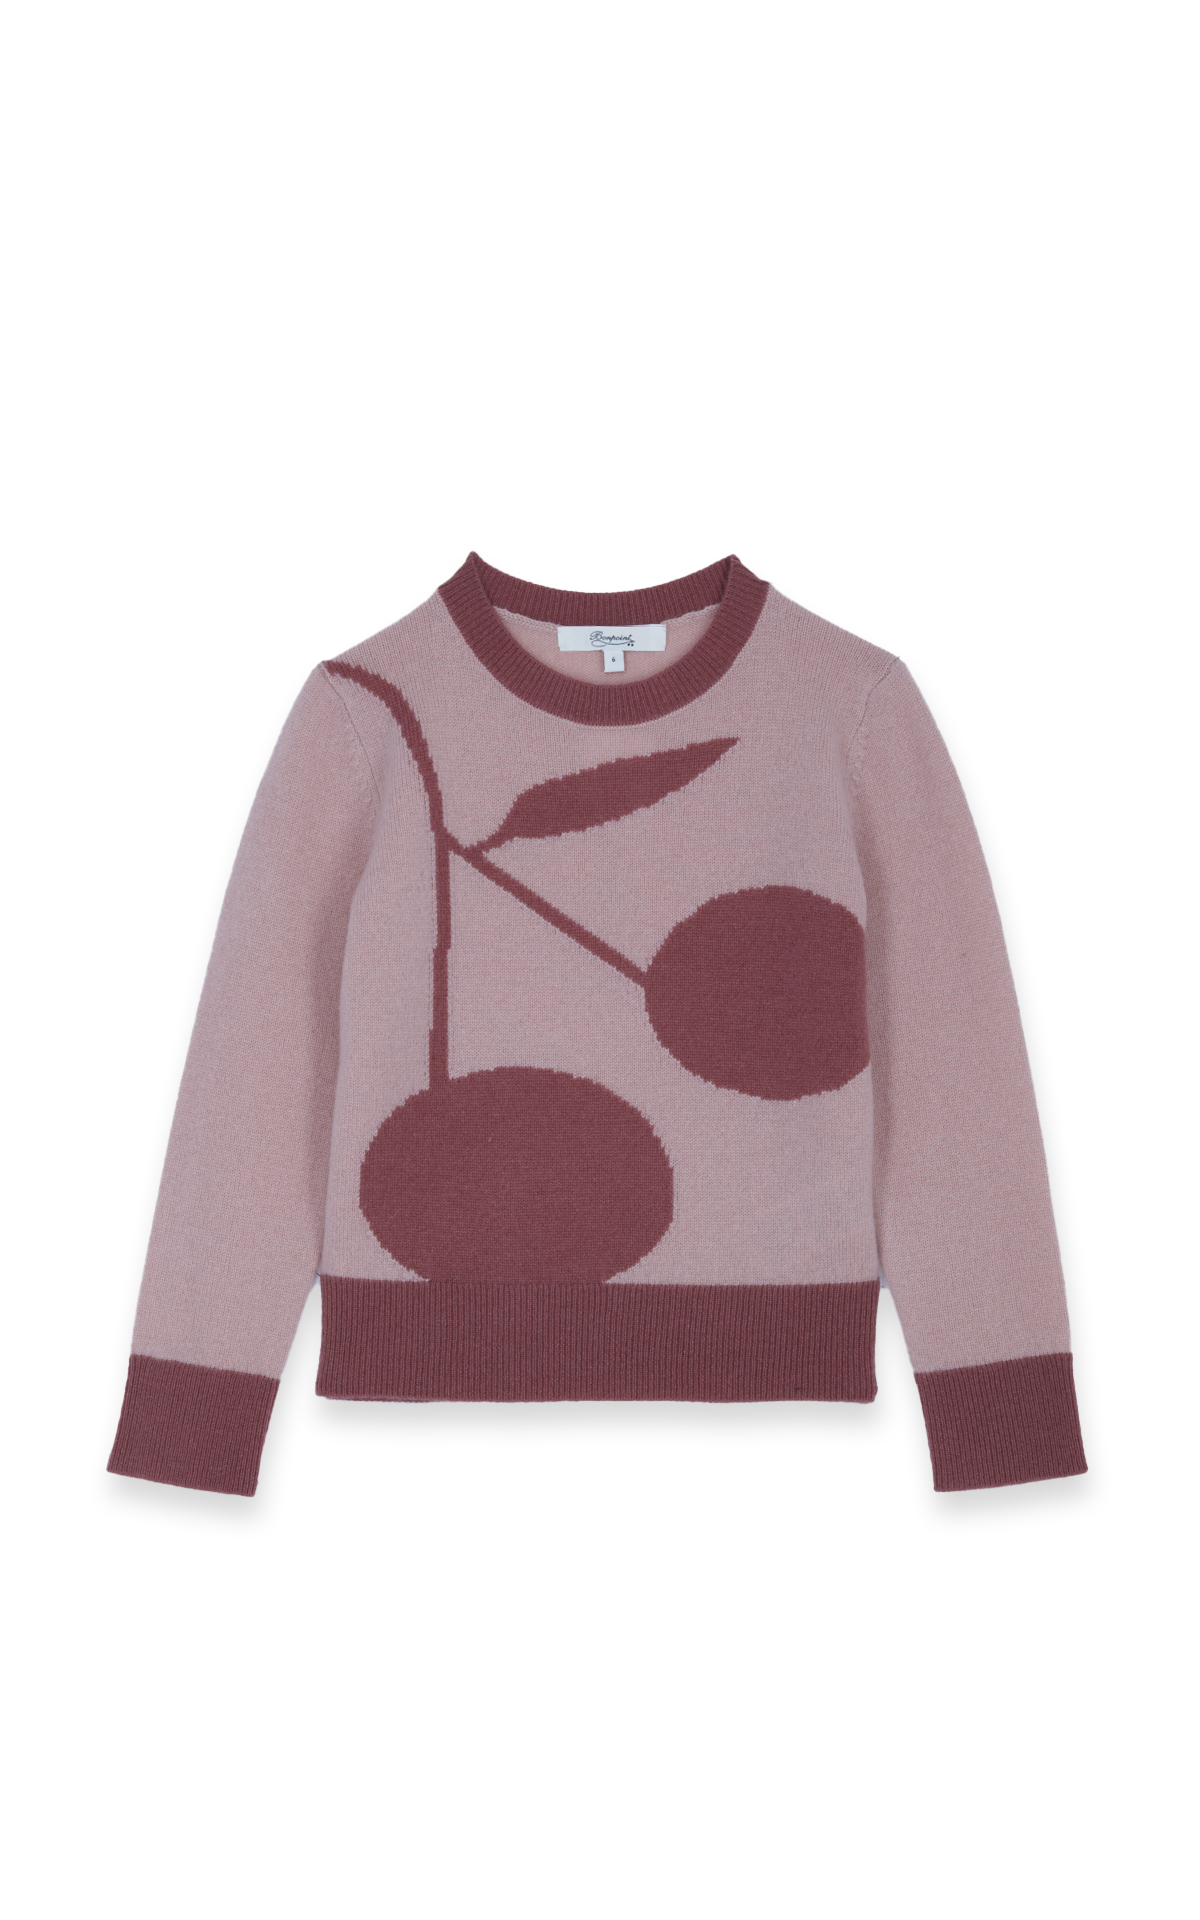 Pink cashmere jumper with cherry logo*